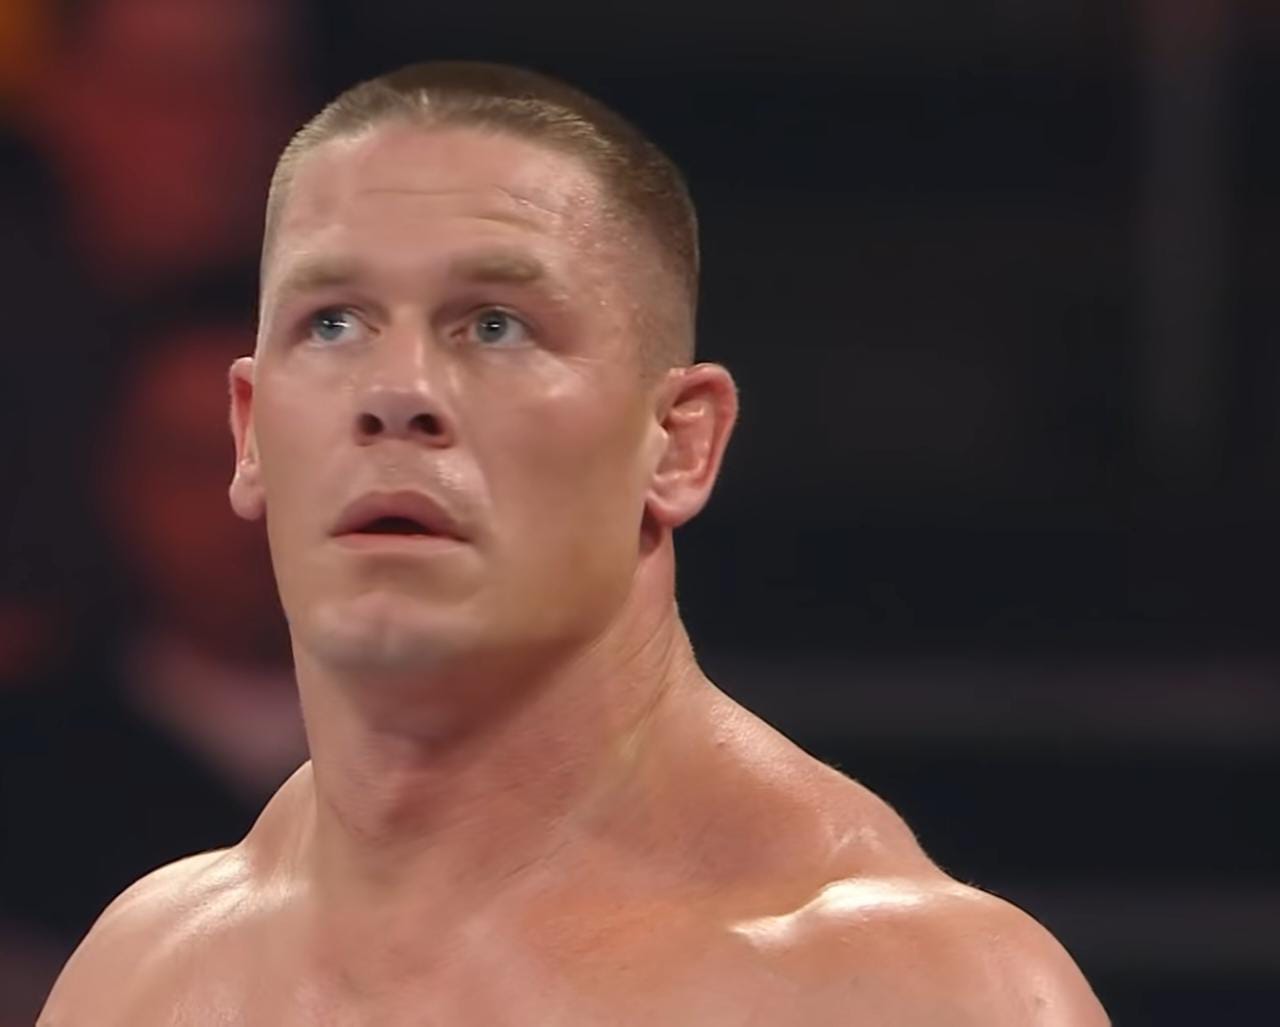 How much is John Cena's Net Worth as of 2023?